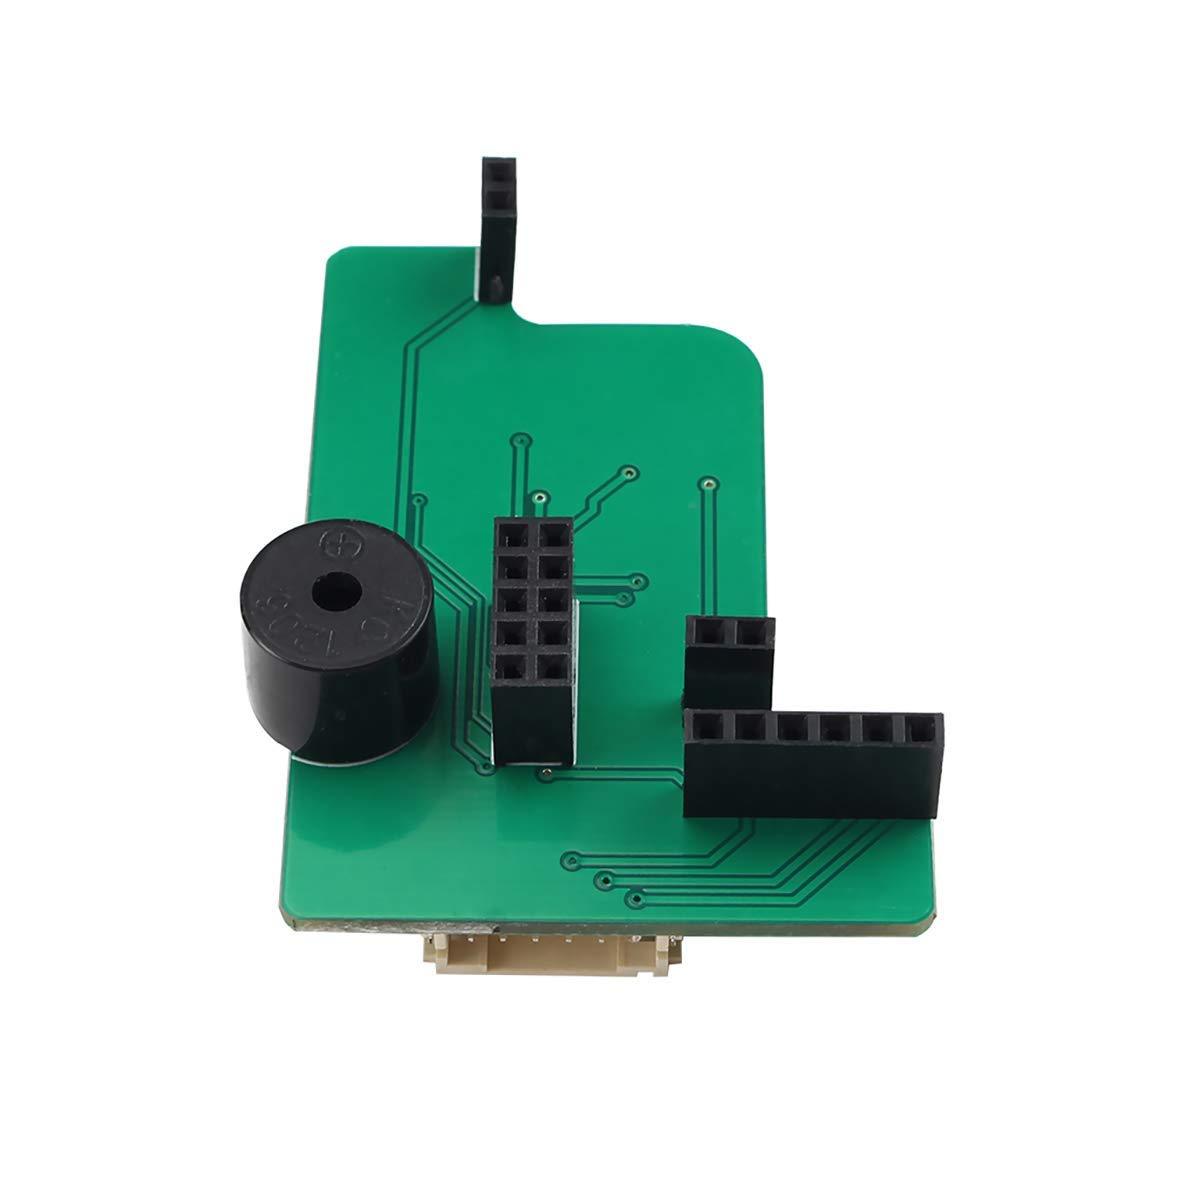 Breakout Transfer Adapter Plate with Buzzer for ANYCUBIC Mega-i3 Mega-S 3D Printer Accessories